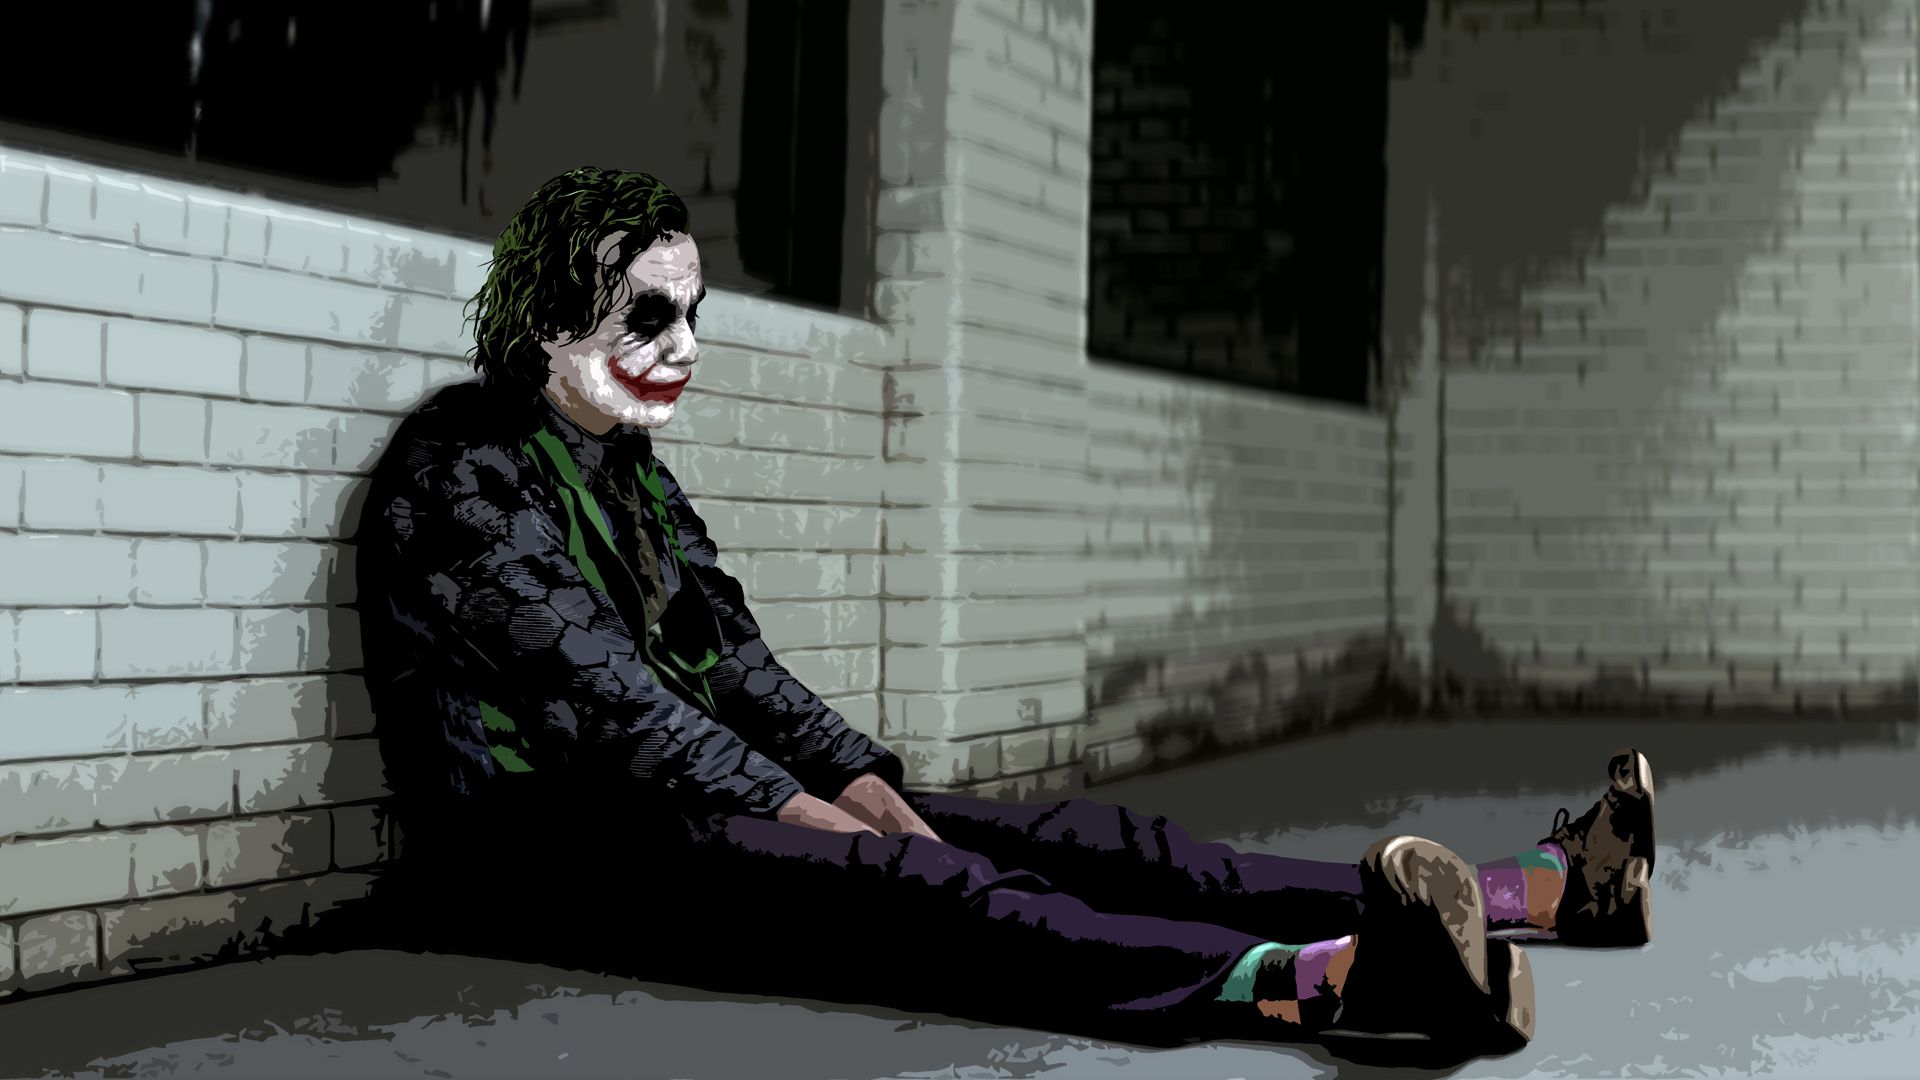 The dark knight the joker wallpaper - (#173456) - High Quality and ...